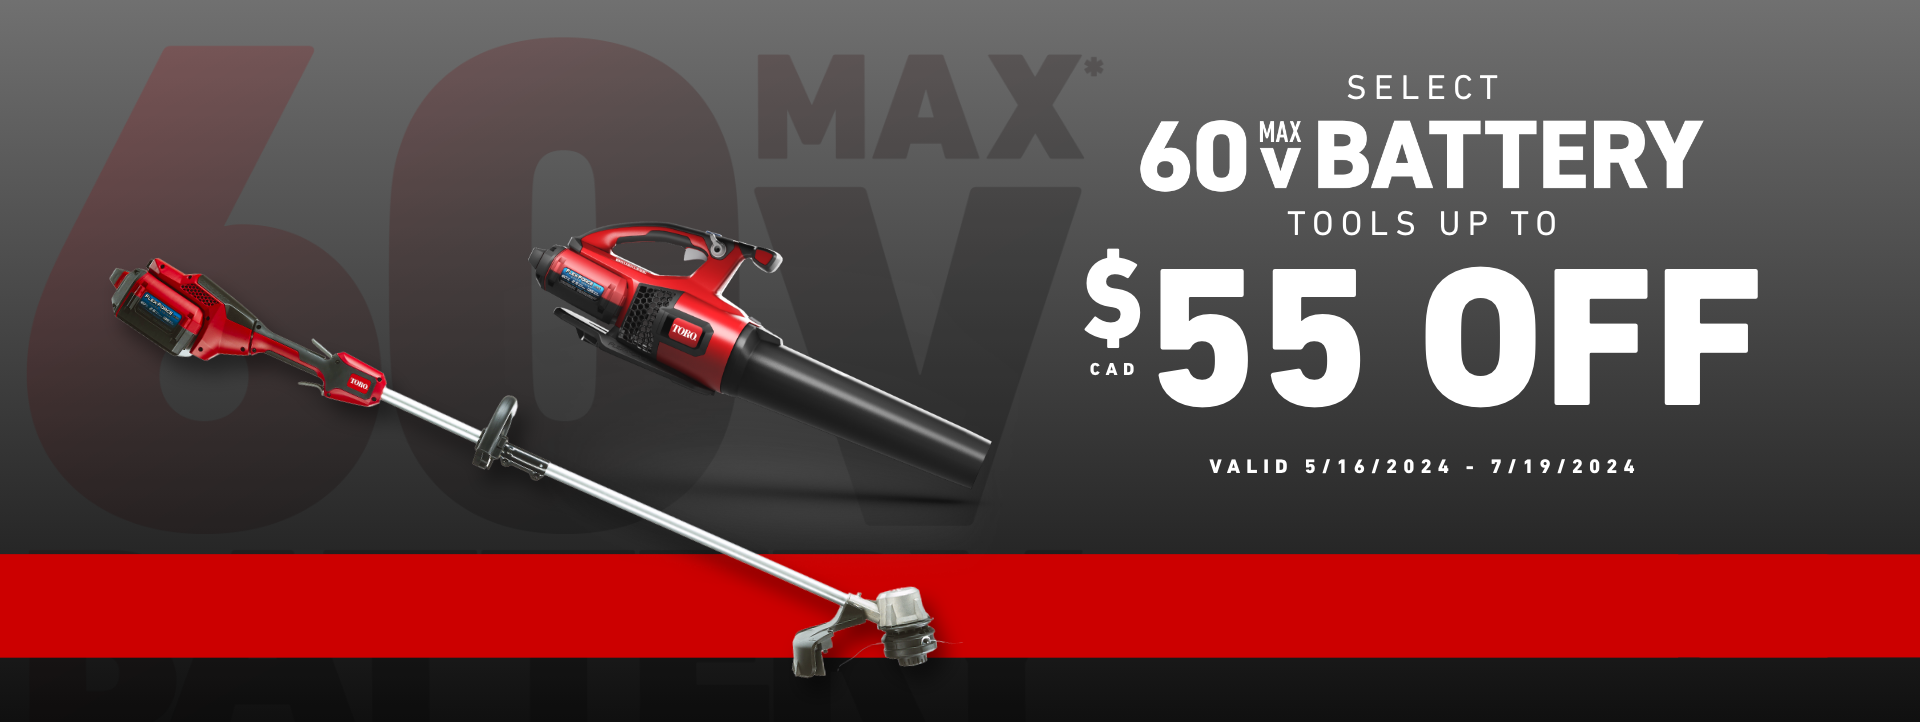 Save $55 off Select 60V Max Battery Yard Tools - shop now through July 19, 2024